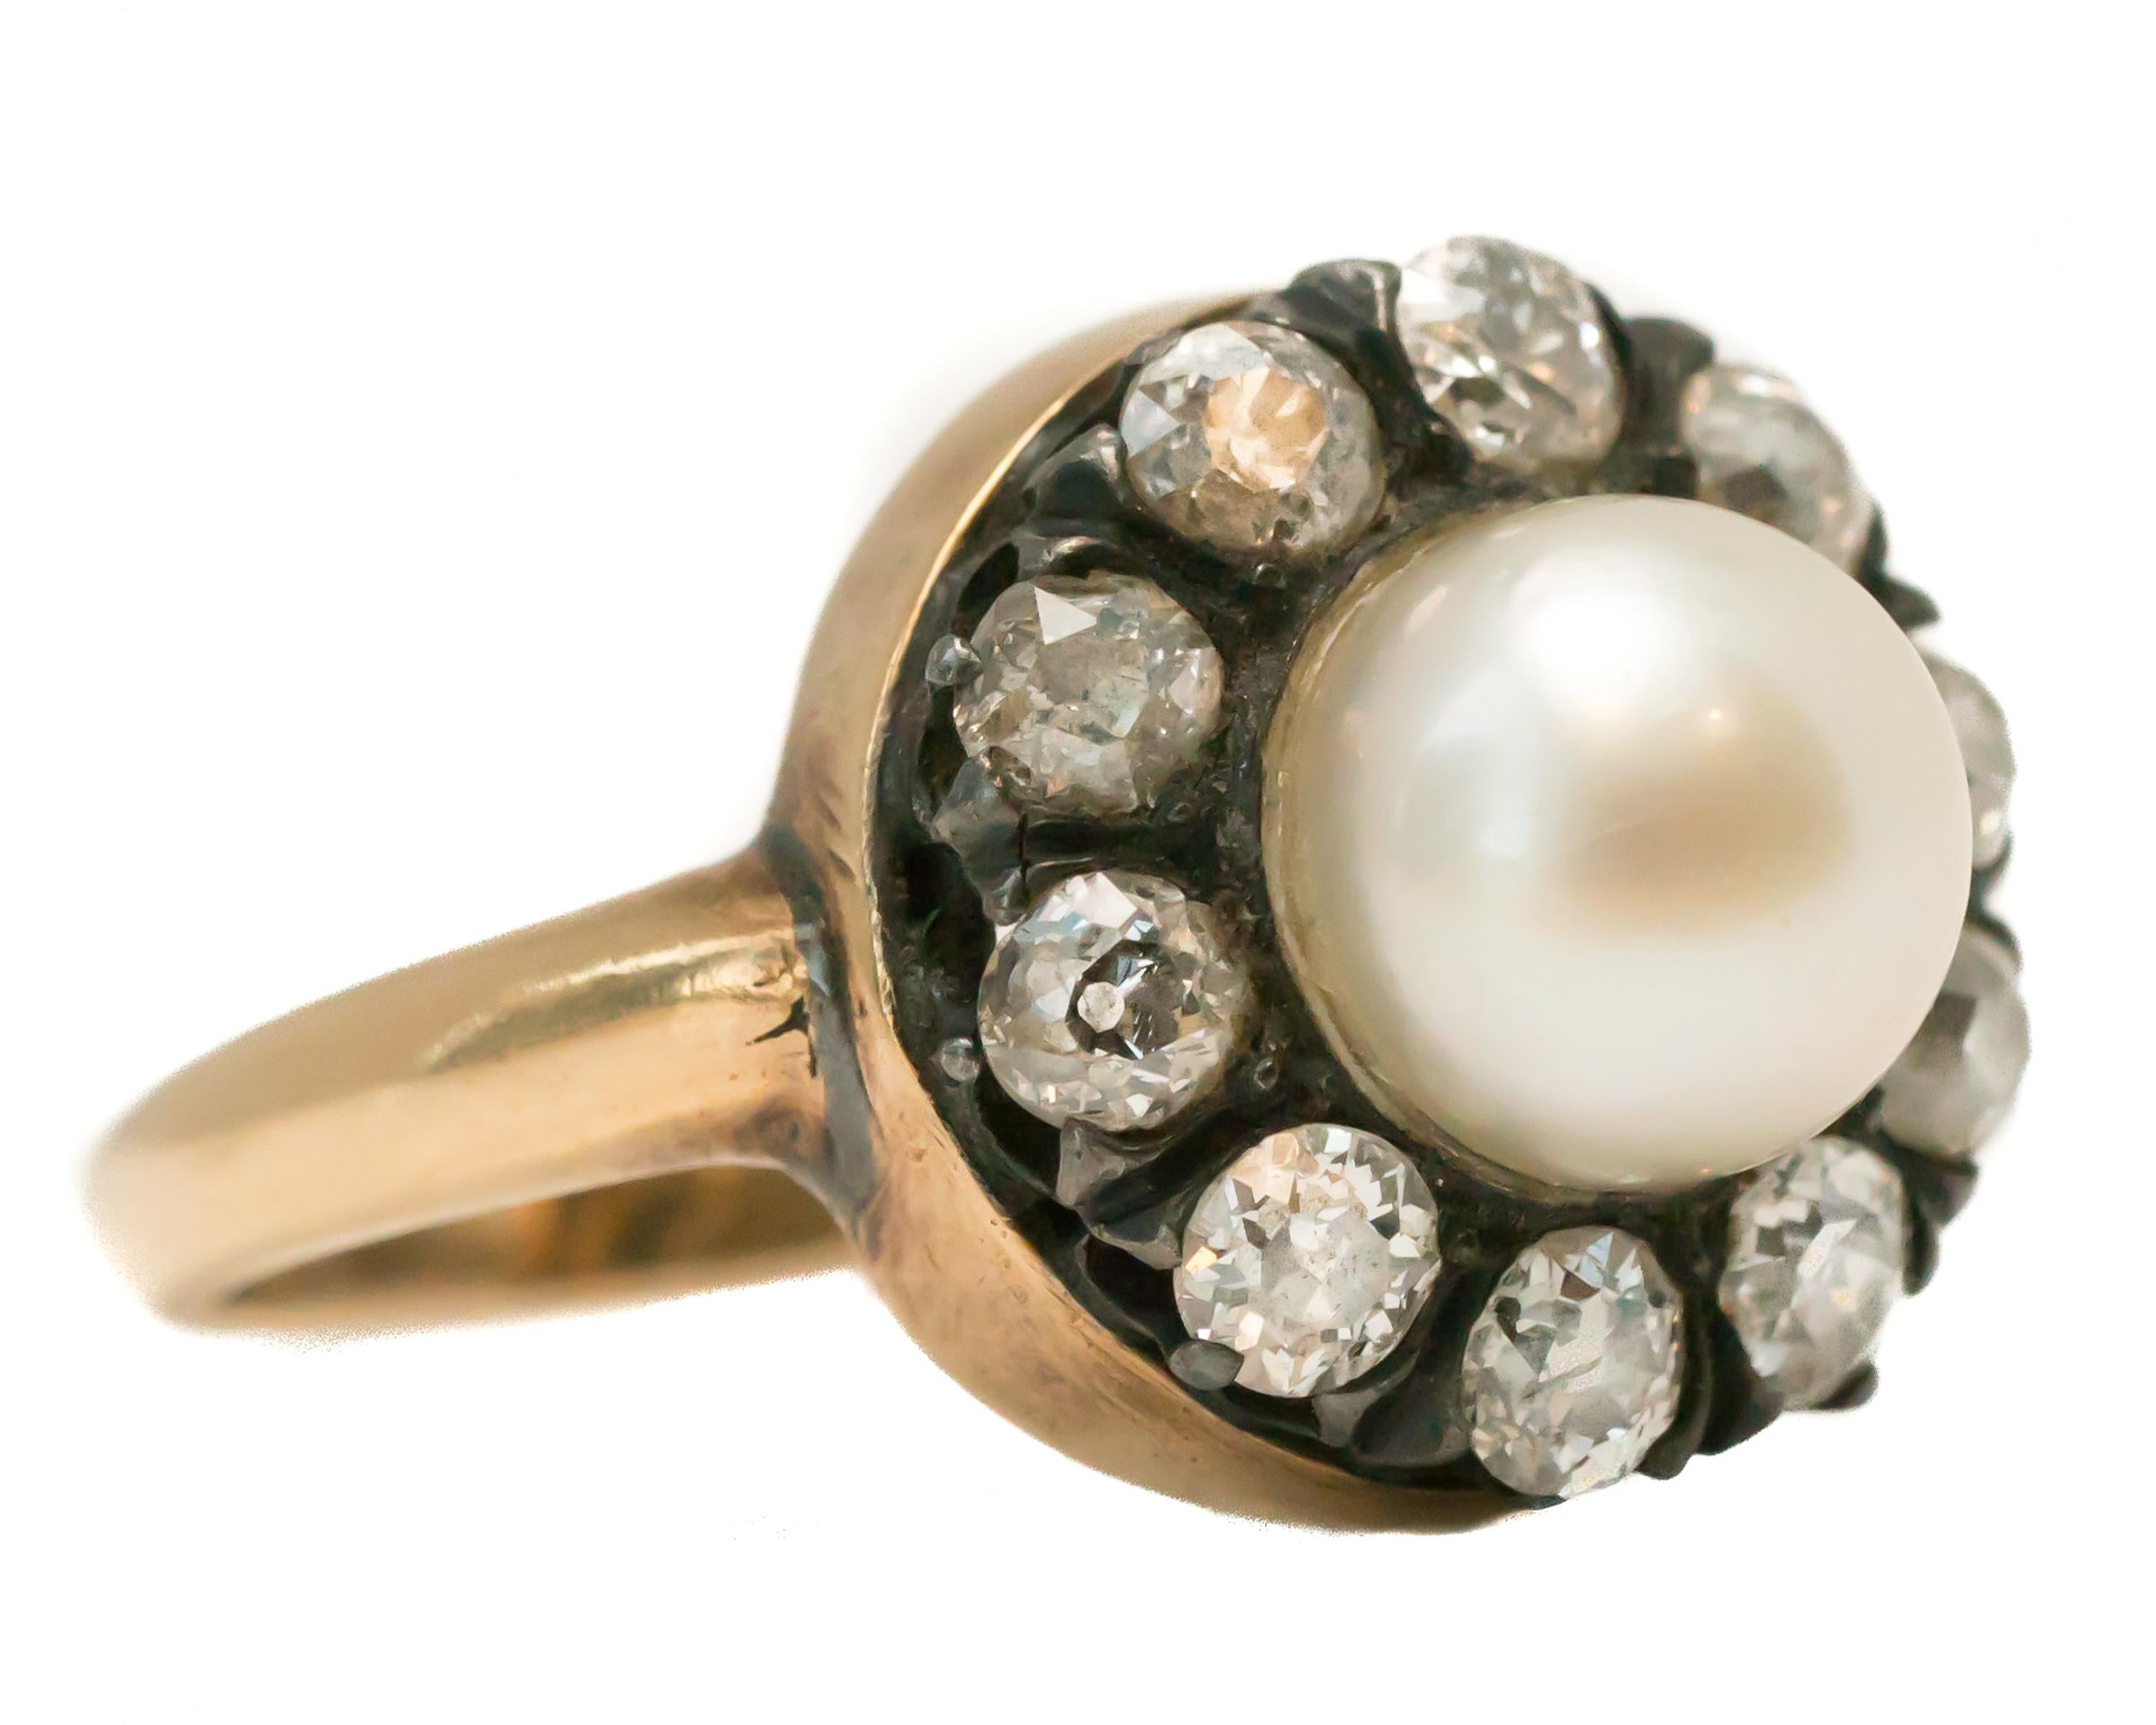 1880s Antique Old Mine Diamond and Pearl Ring - 14 Karat Yellow Gold, Pearl, Diamonds

Features:
7.5 millimeter Pearl
1.0 carat total round Old Mine Diamonds
14 Karat Yellow Gold Setting
Gorgeous White Pearl has fantastic luster and iridescence with